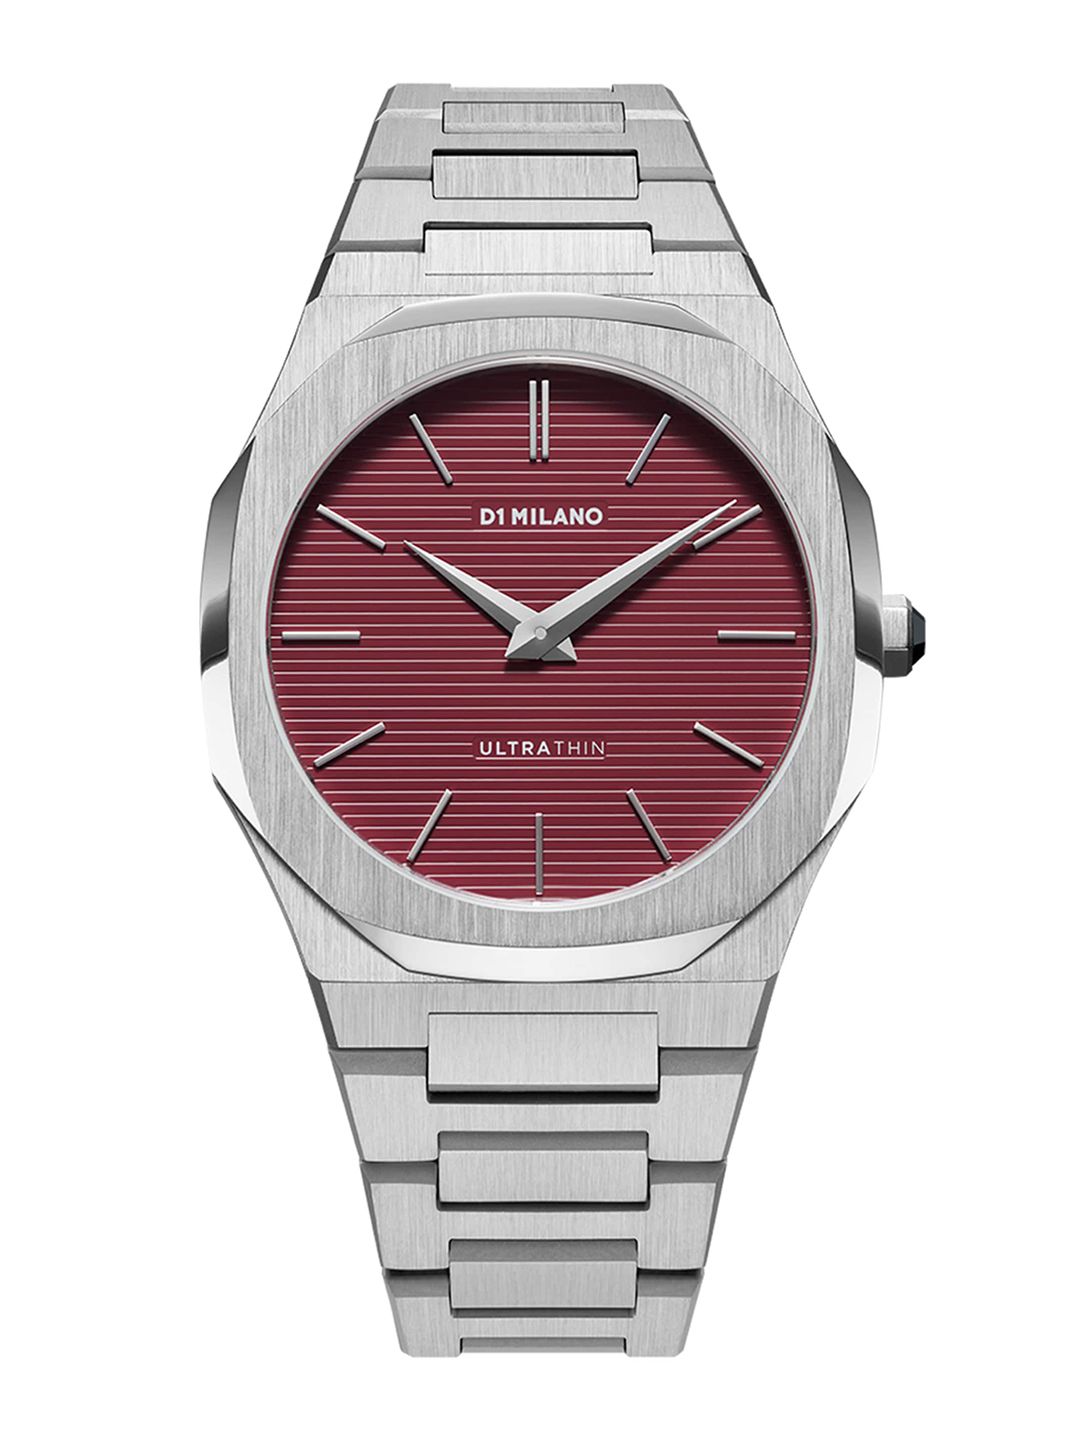 D1 Milano Red Dial & Silver-Toned Stainless Steel Straps Analog Watch - UTBJ11 Price in India